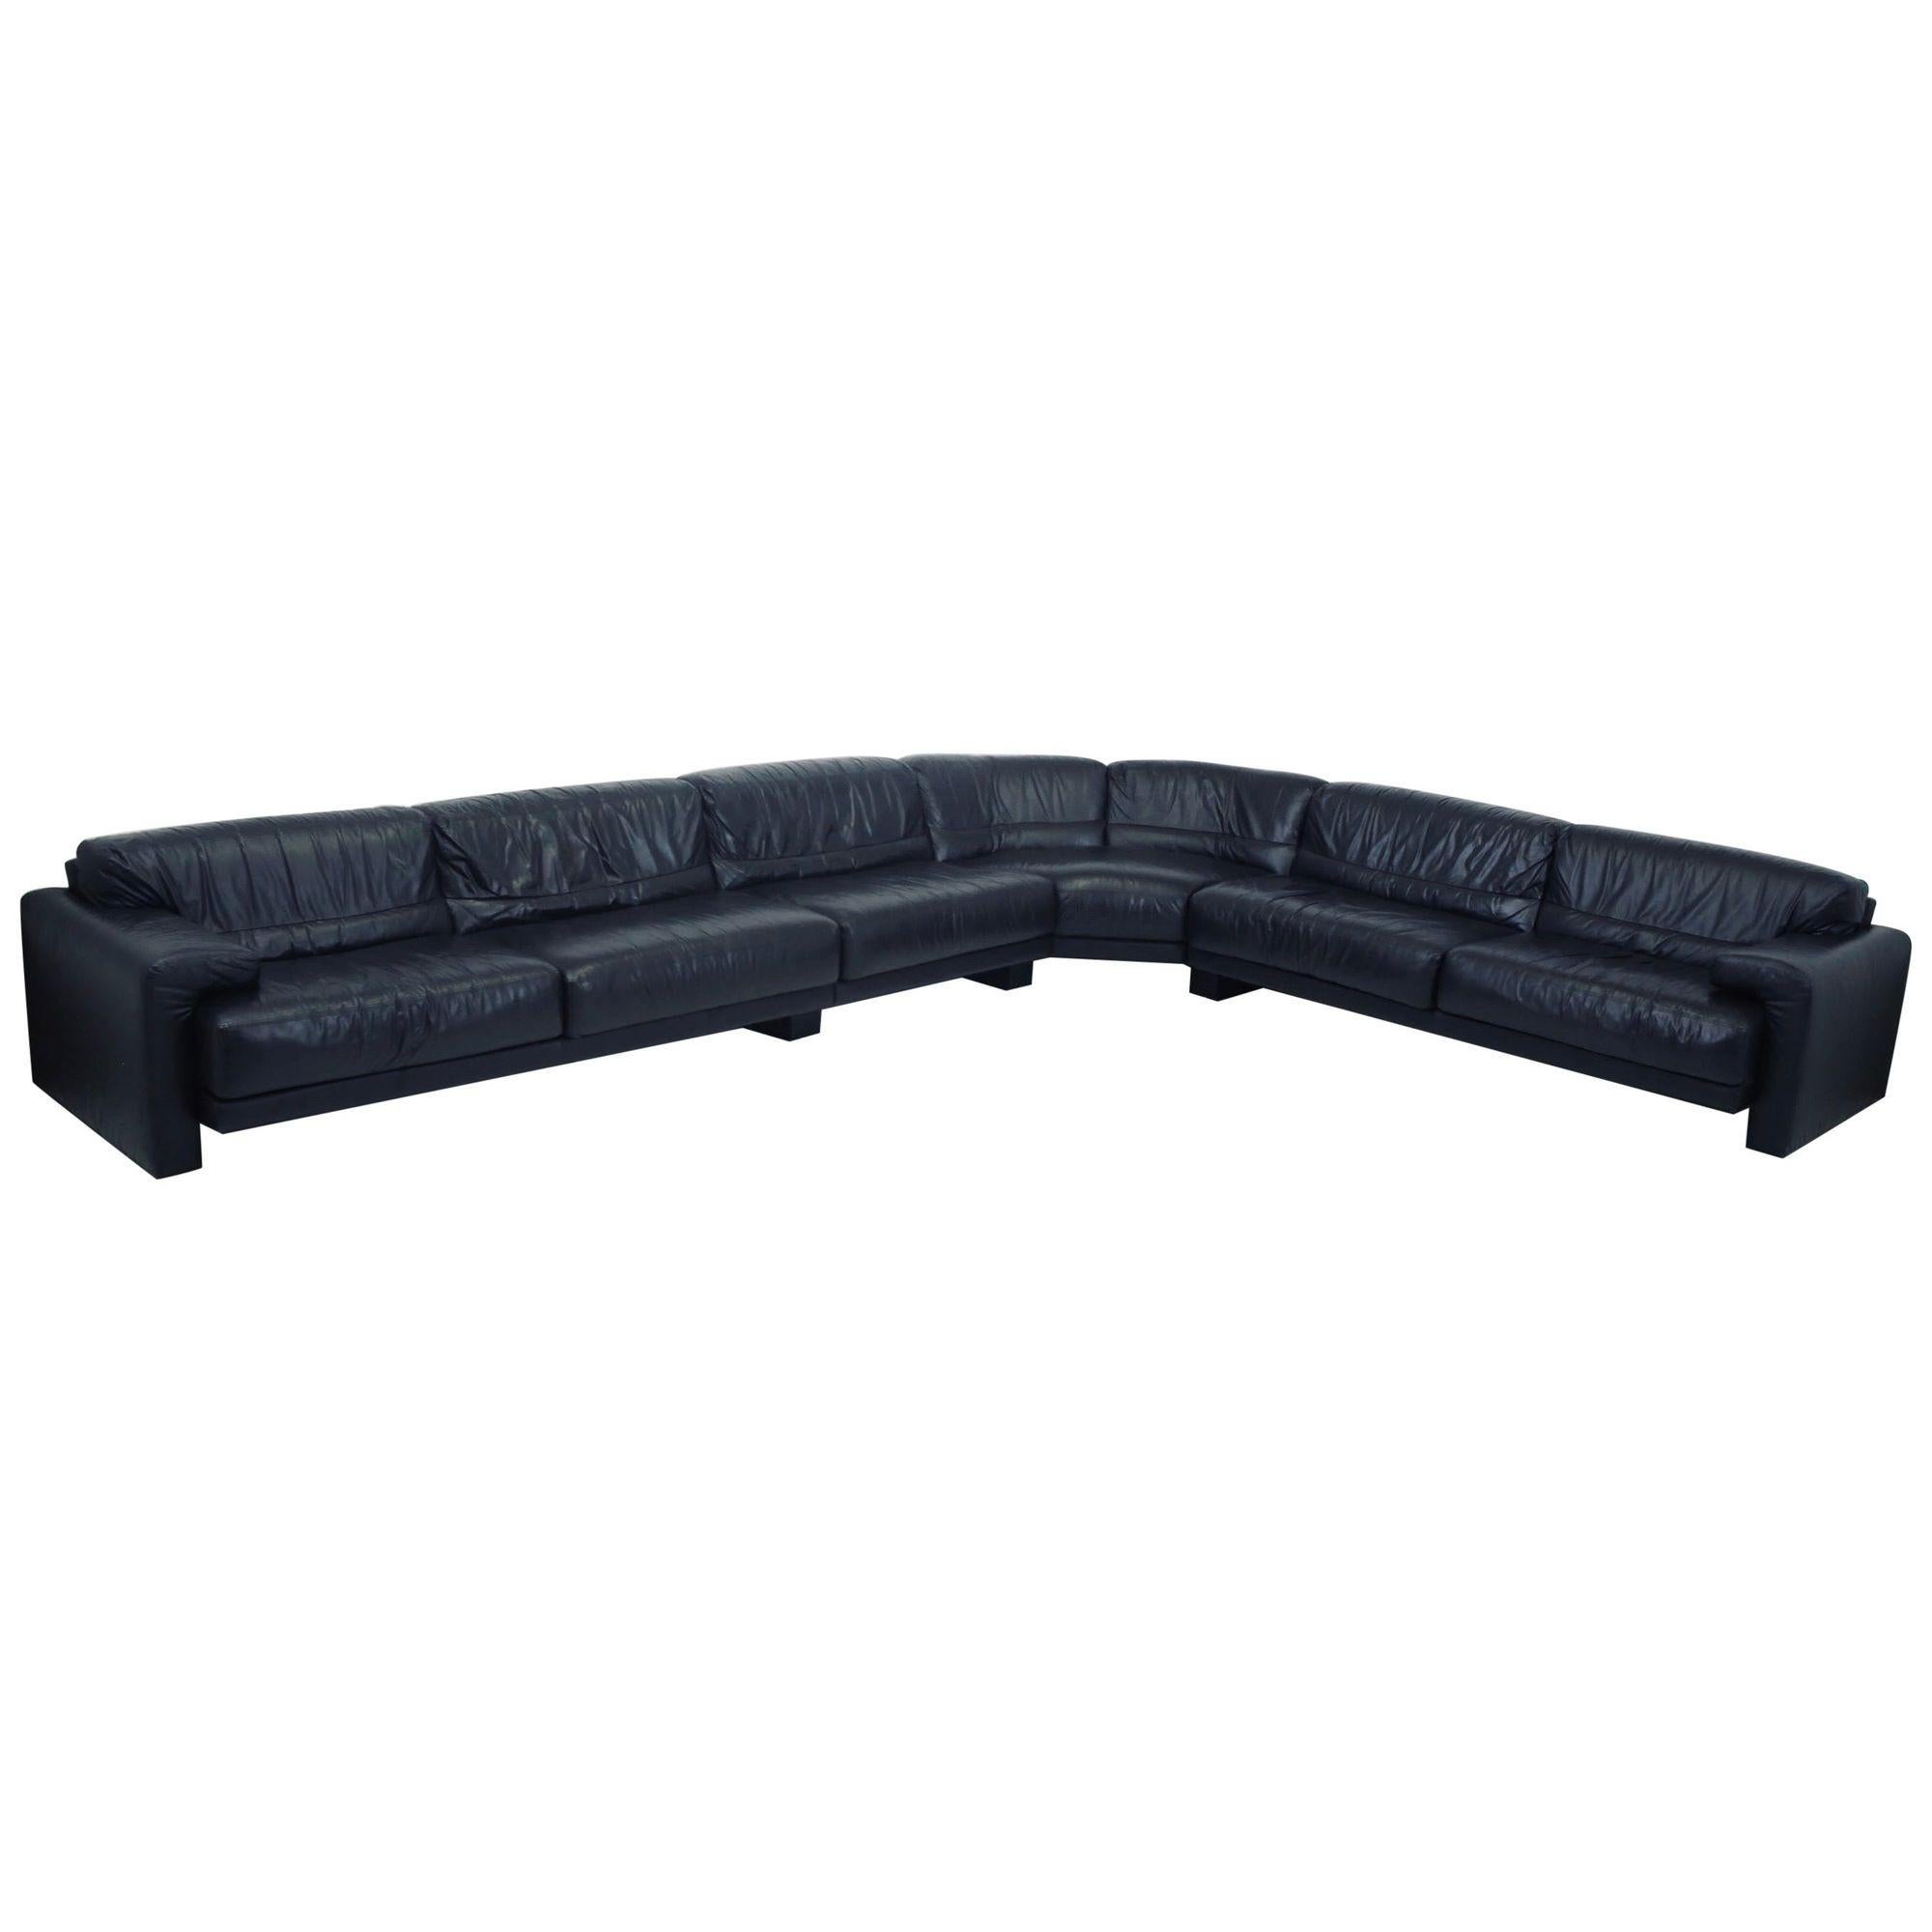 Large scale black leather sectional made by Preview furniture. A sectional version of the “Midday sofa series” produced by Saporiti in 1981. Original leather is in very good condition. Each cushion is 39